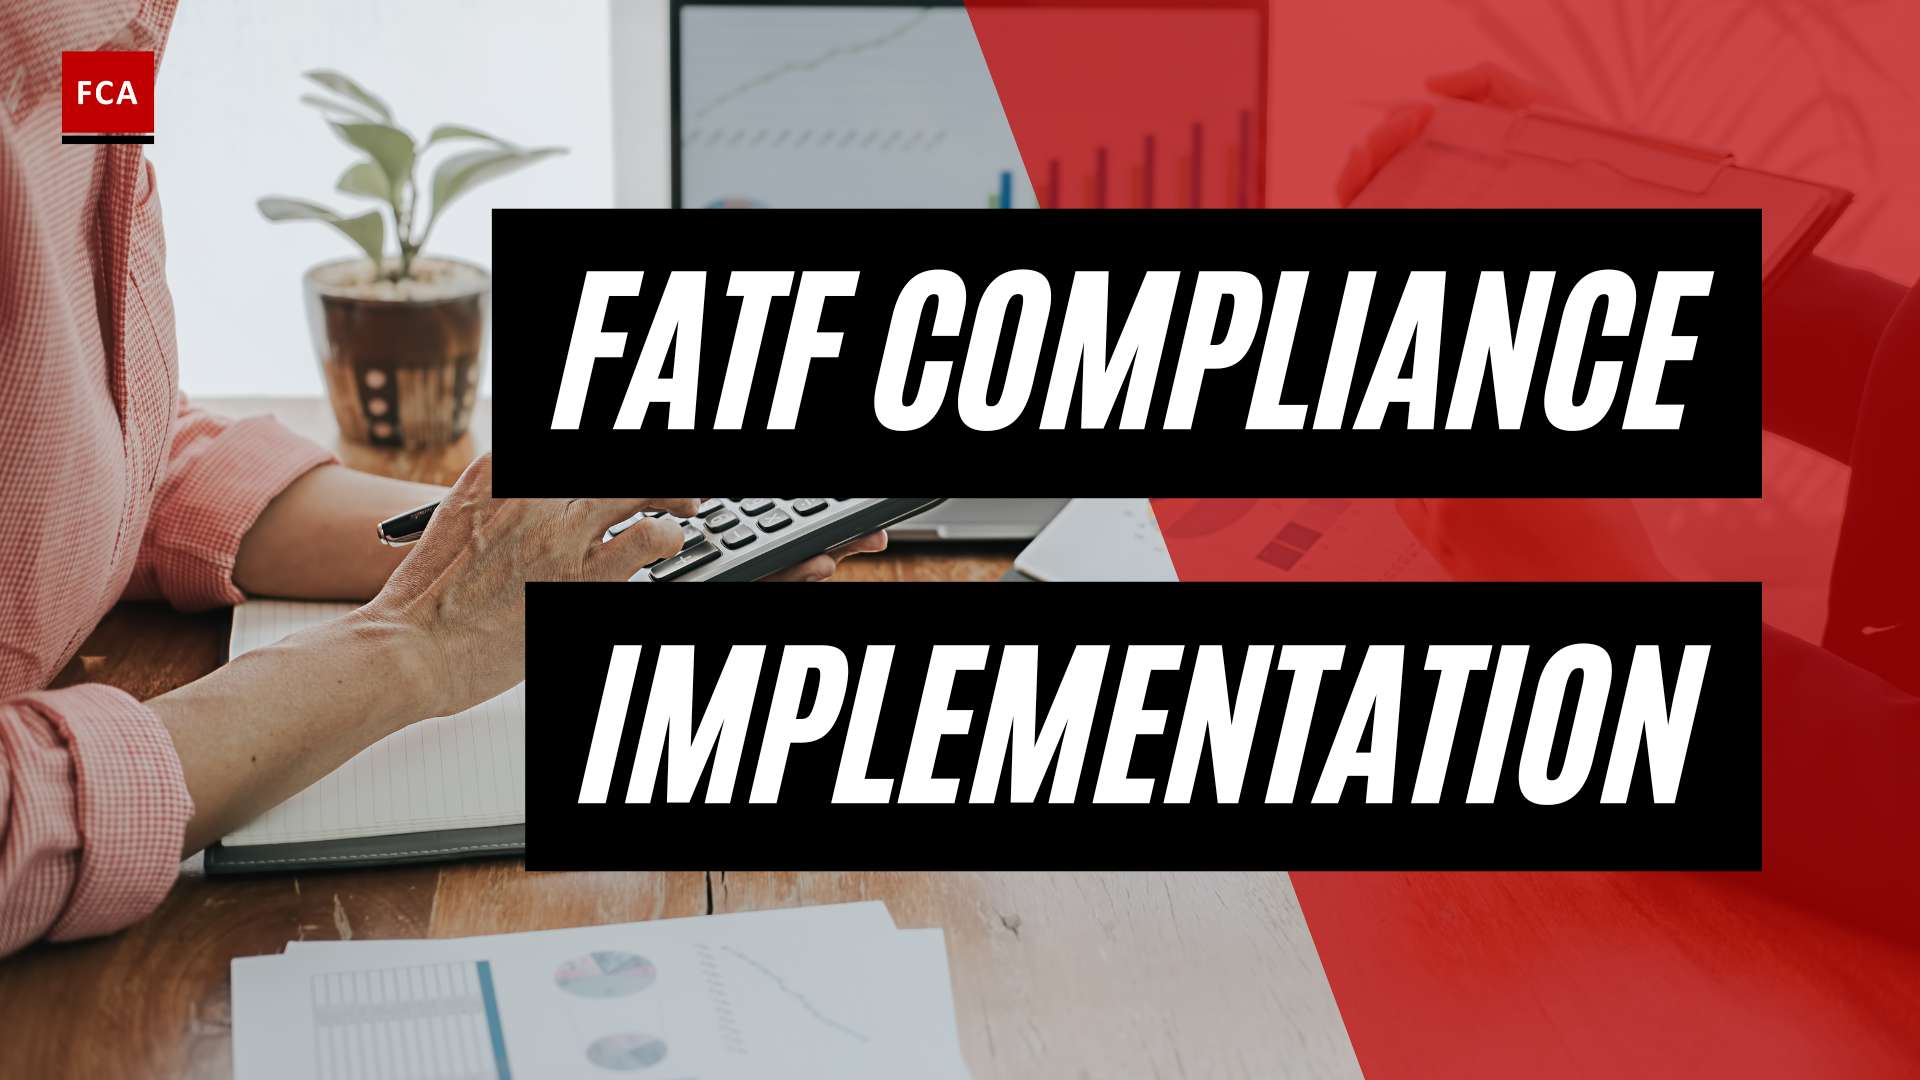 From Risk To Resilience: Implementing Fatf Recommendations For Aml Compliance